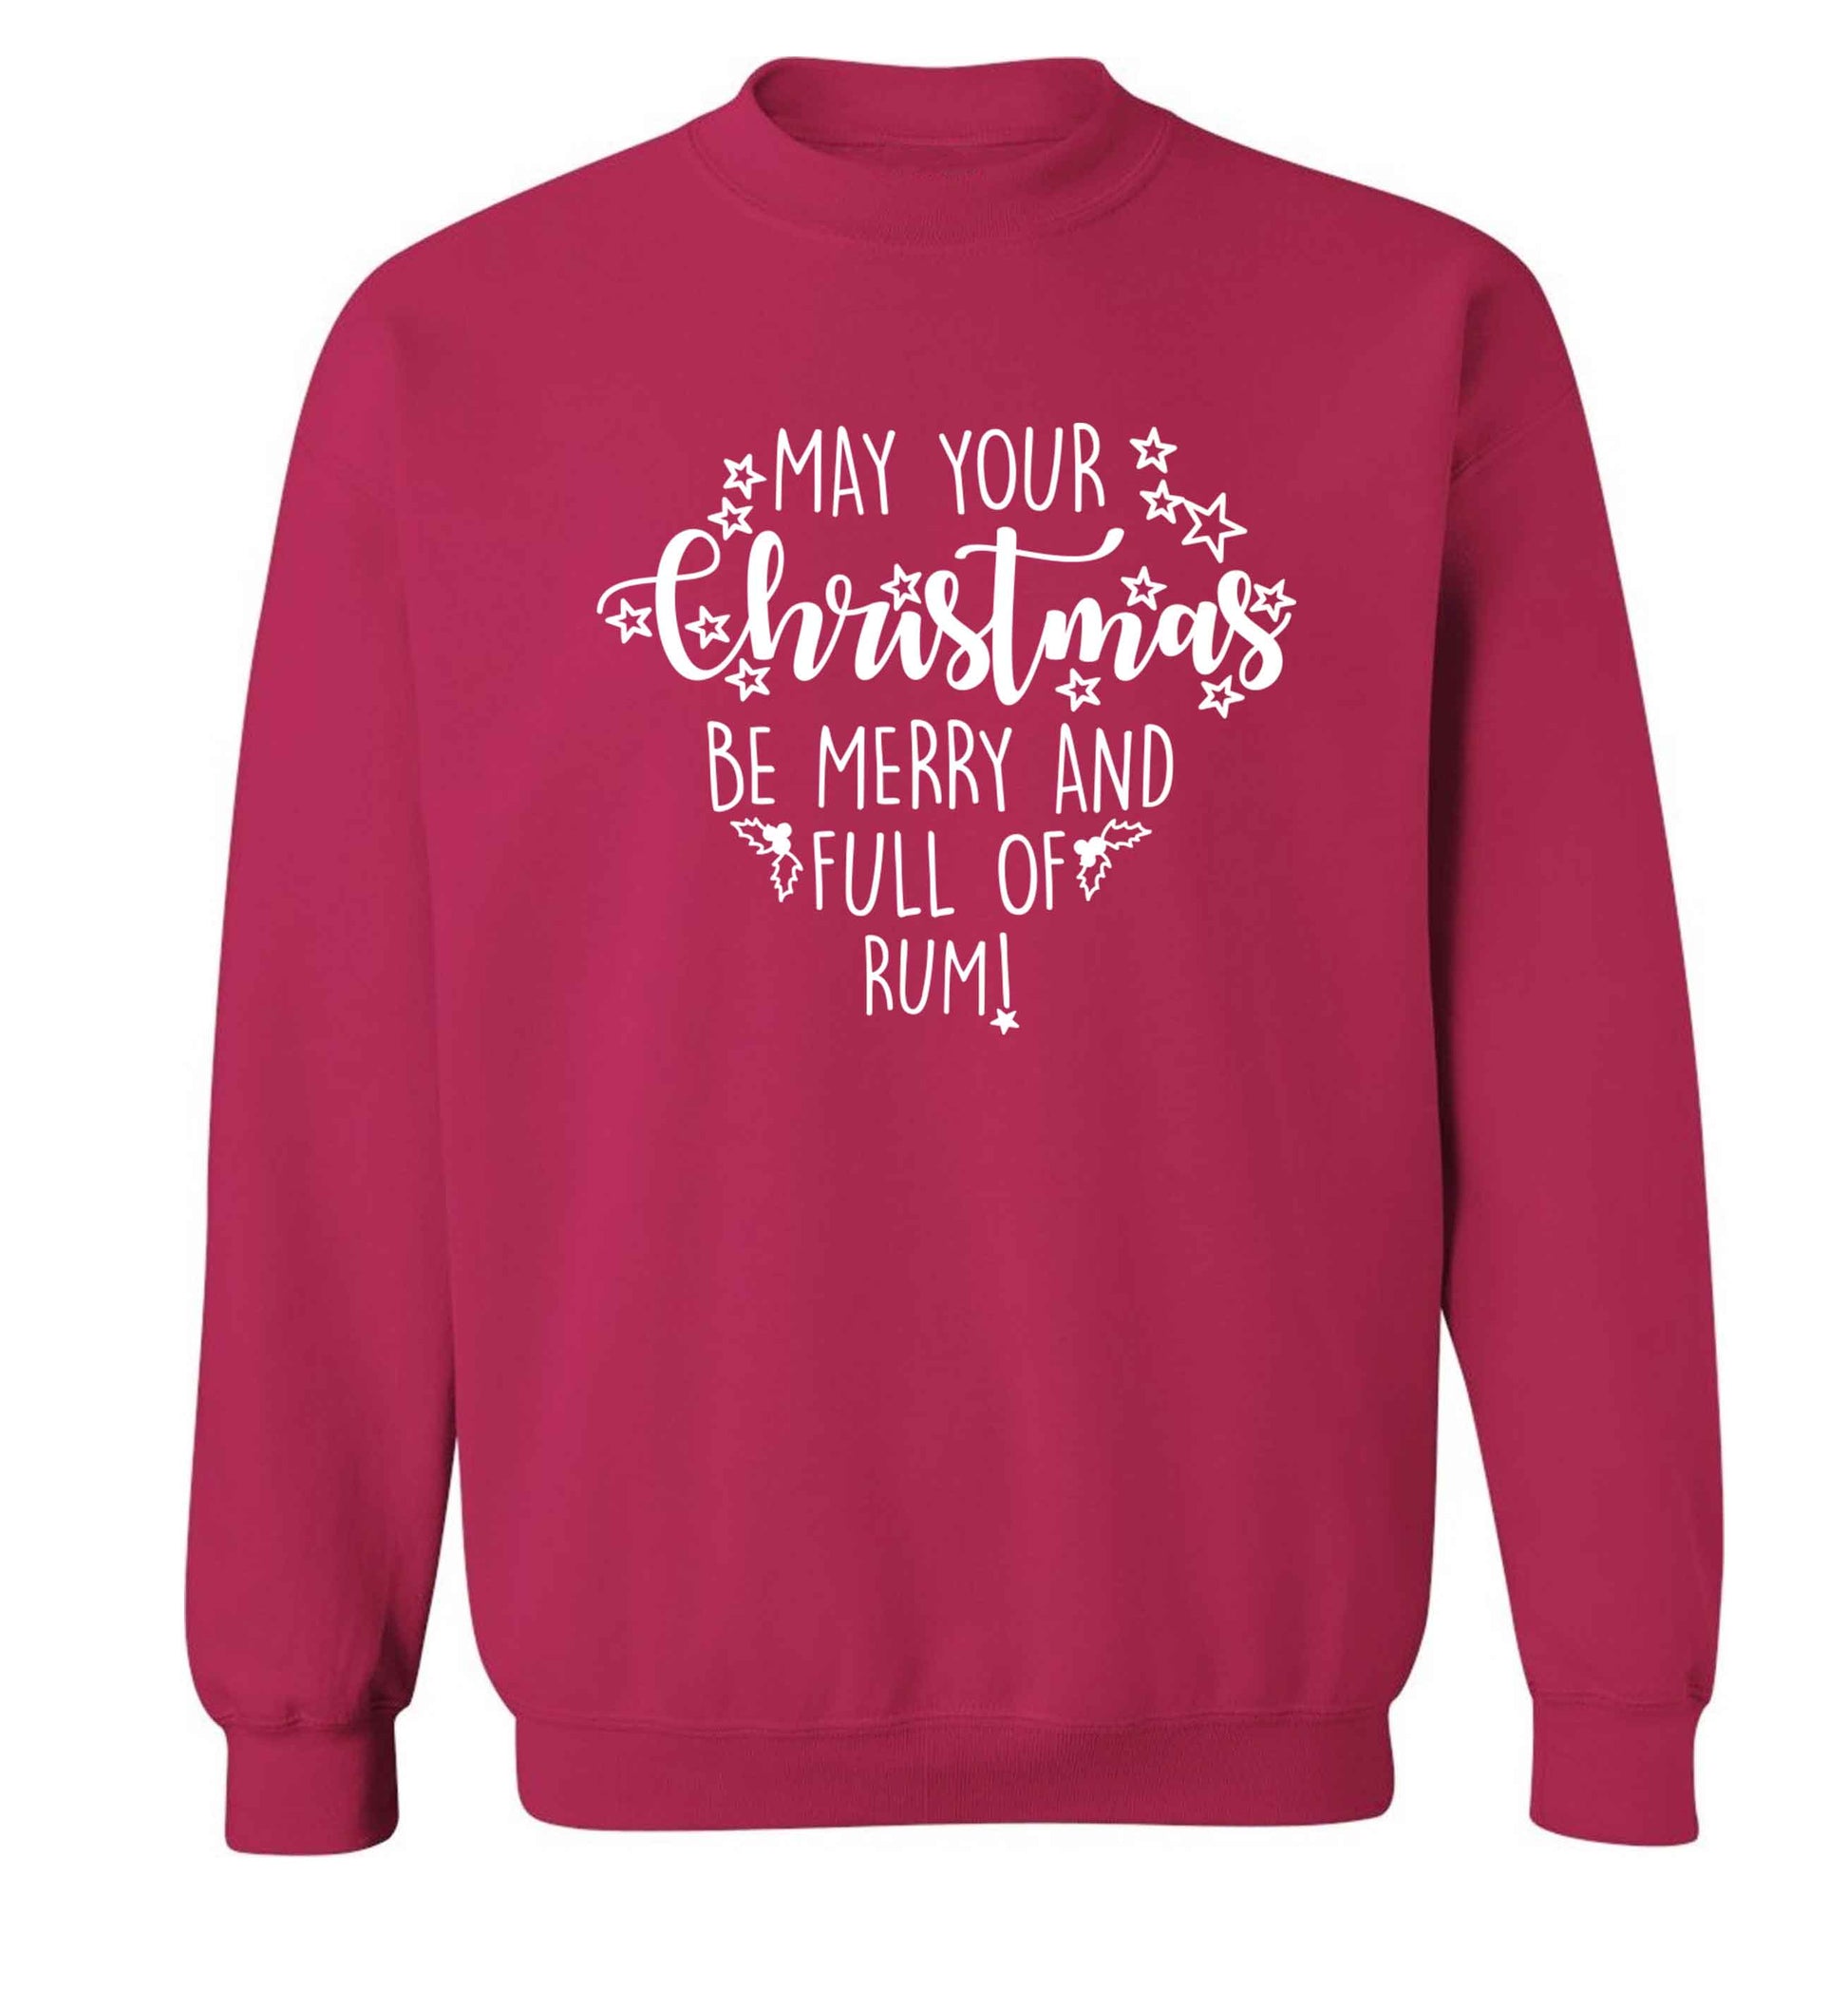 May your Christmas be merry and full of rum Adult's unisex pink Sweater 2XL